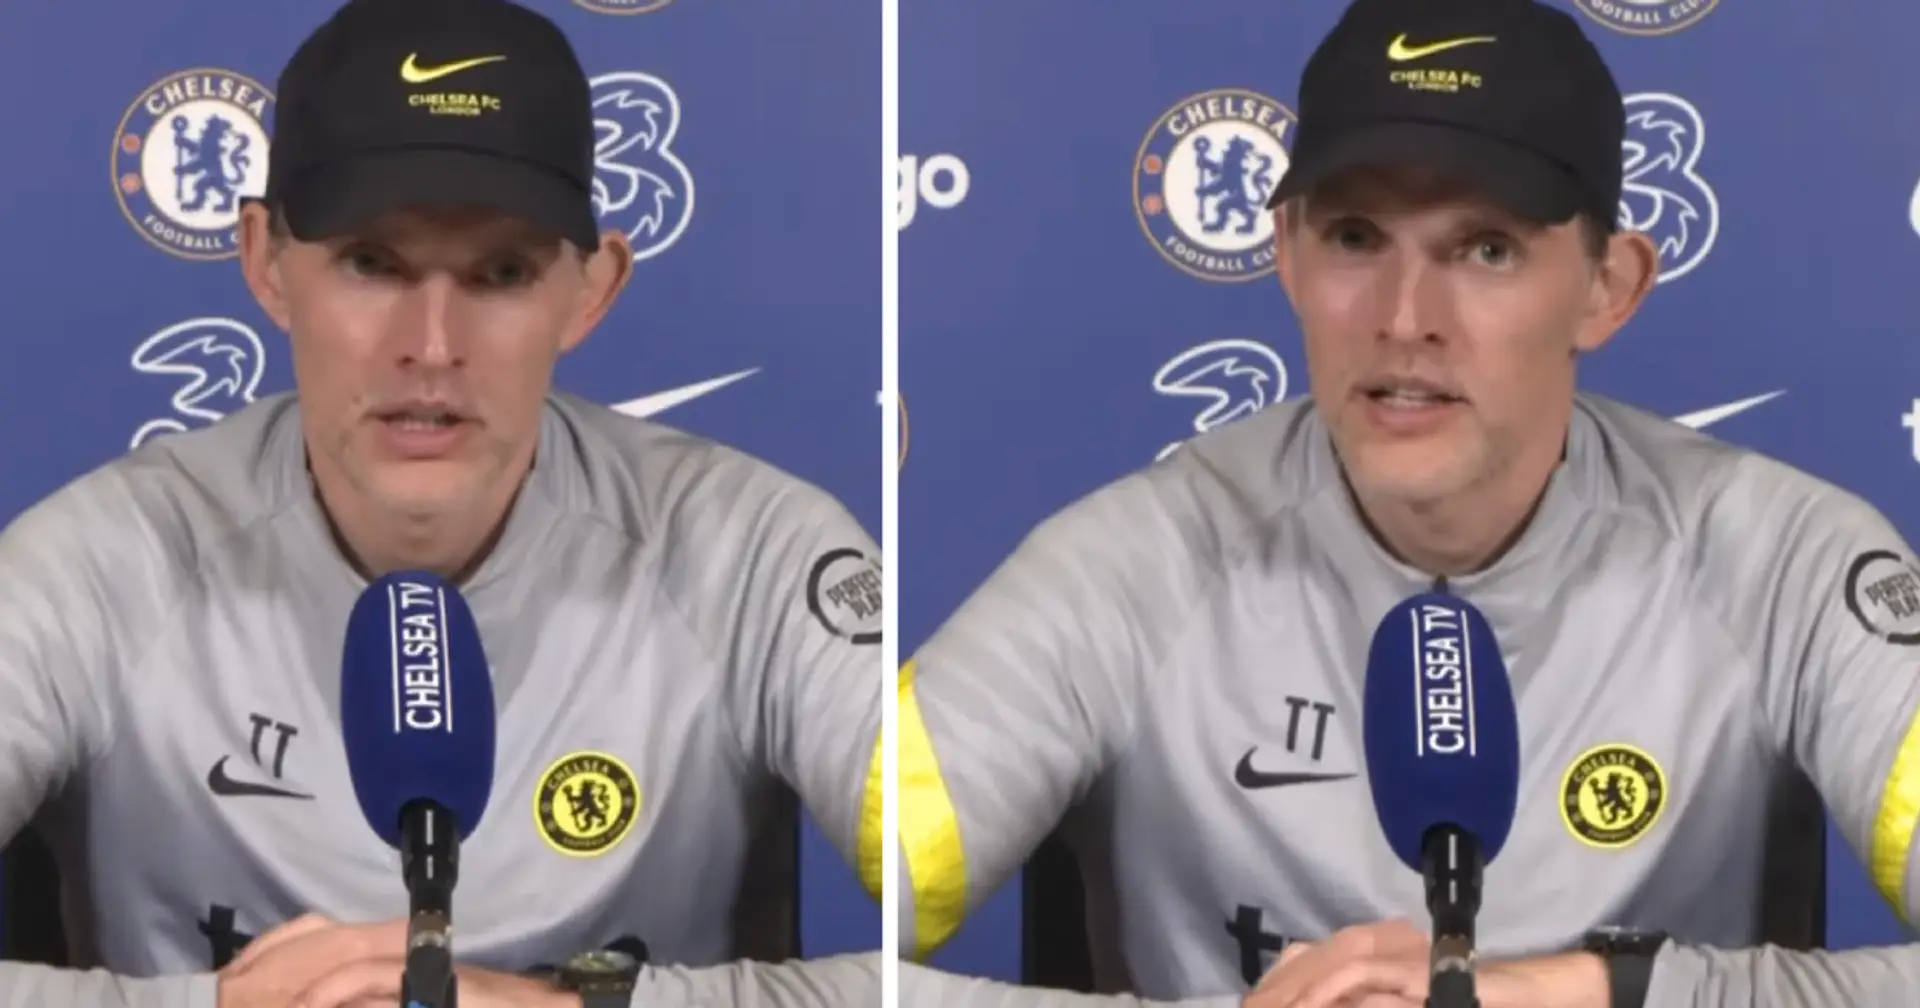 'I expect a unique approach': Tuchel previews Leeds clash, outlines what Chelsea need to do